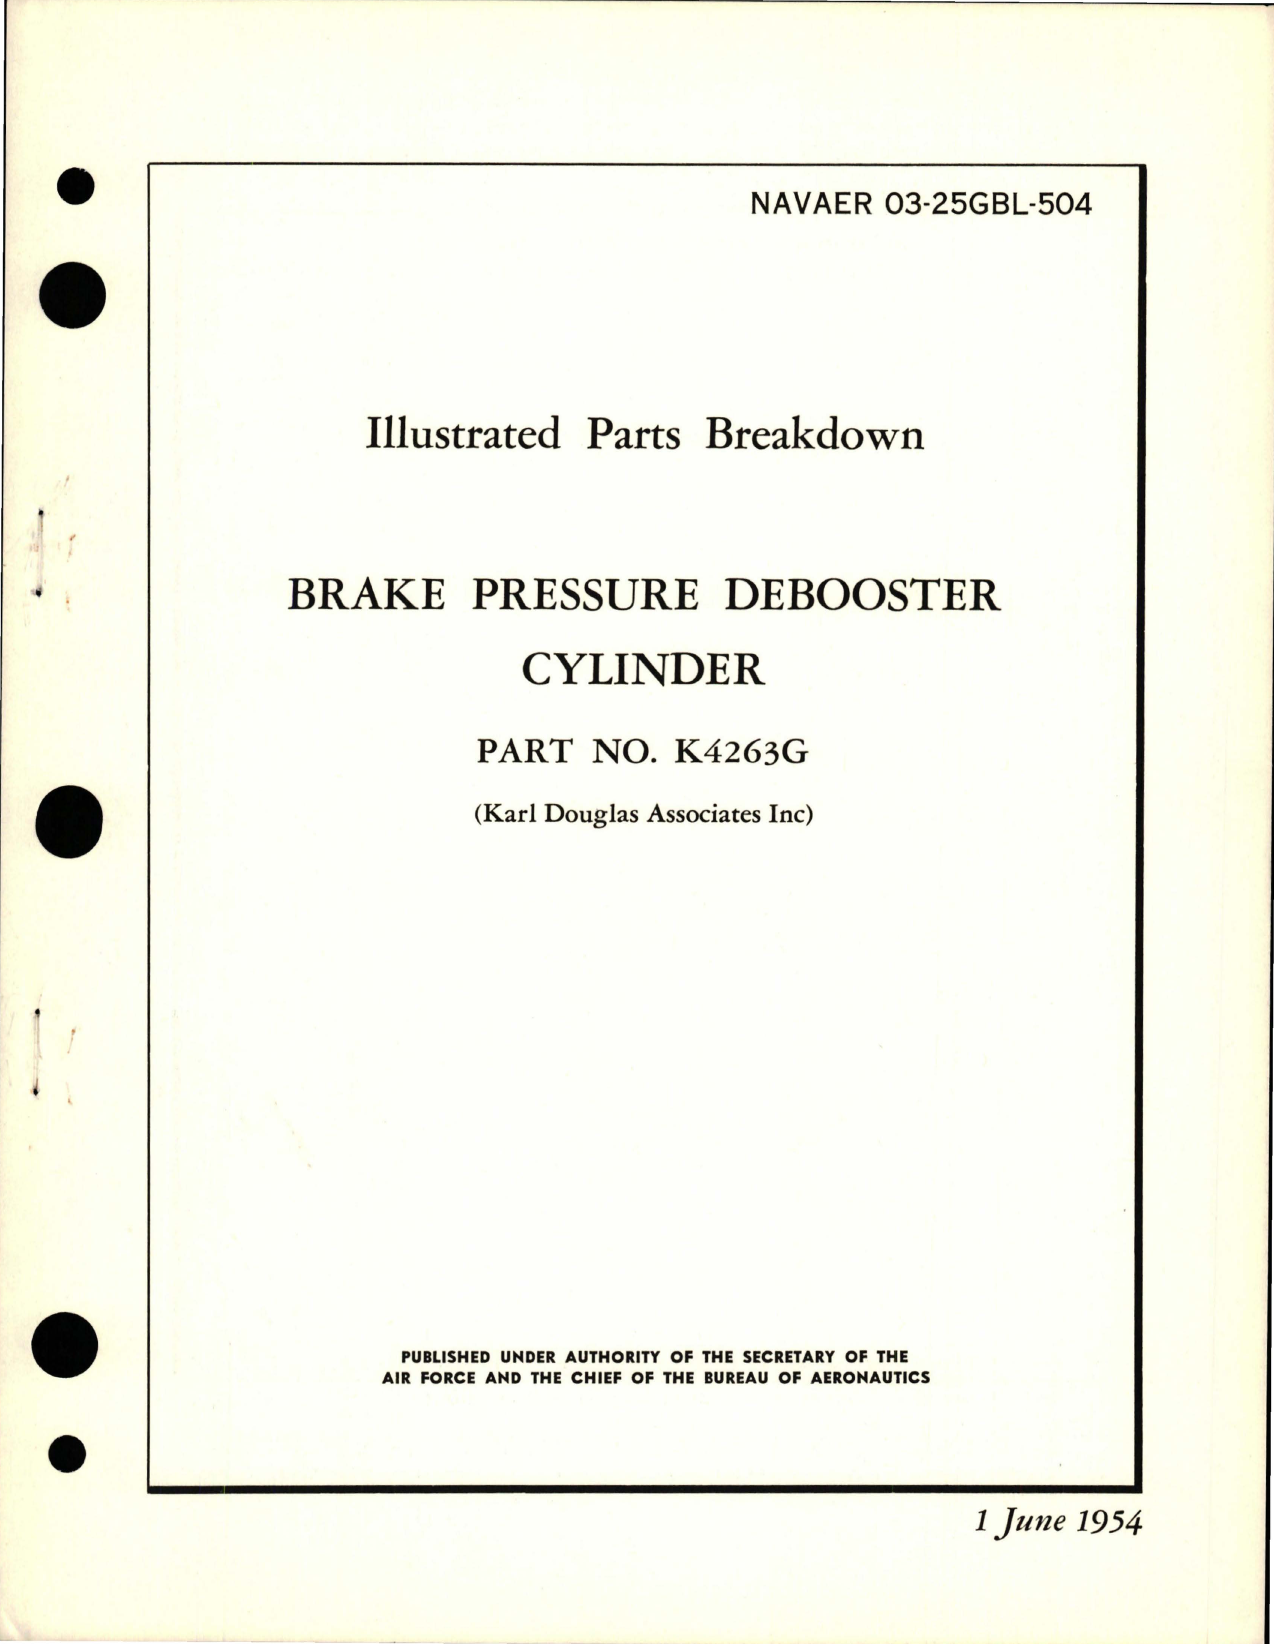 Sample page 1 from AirCorps Library document: Illustrated Parts Breakdown for Brake Pressure Debooster Cylinder - Part K4263G